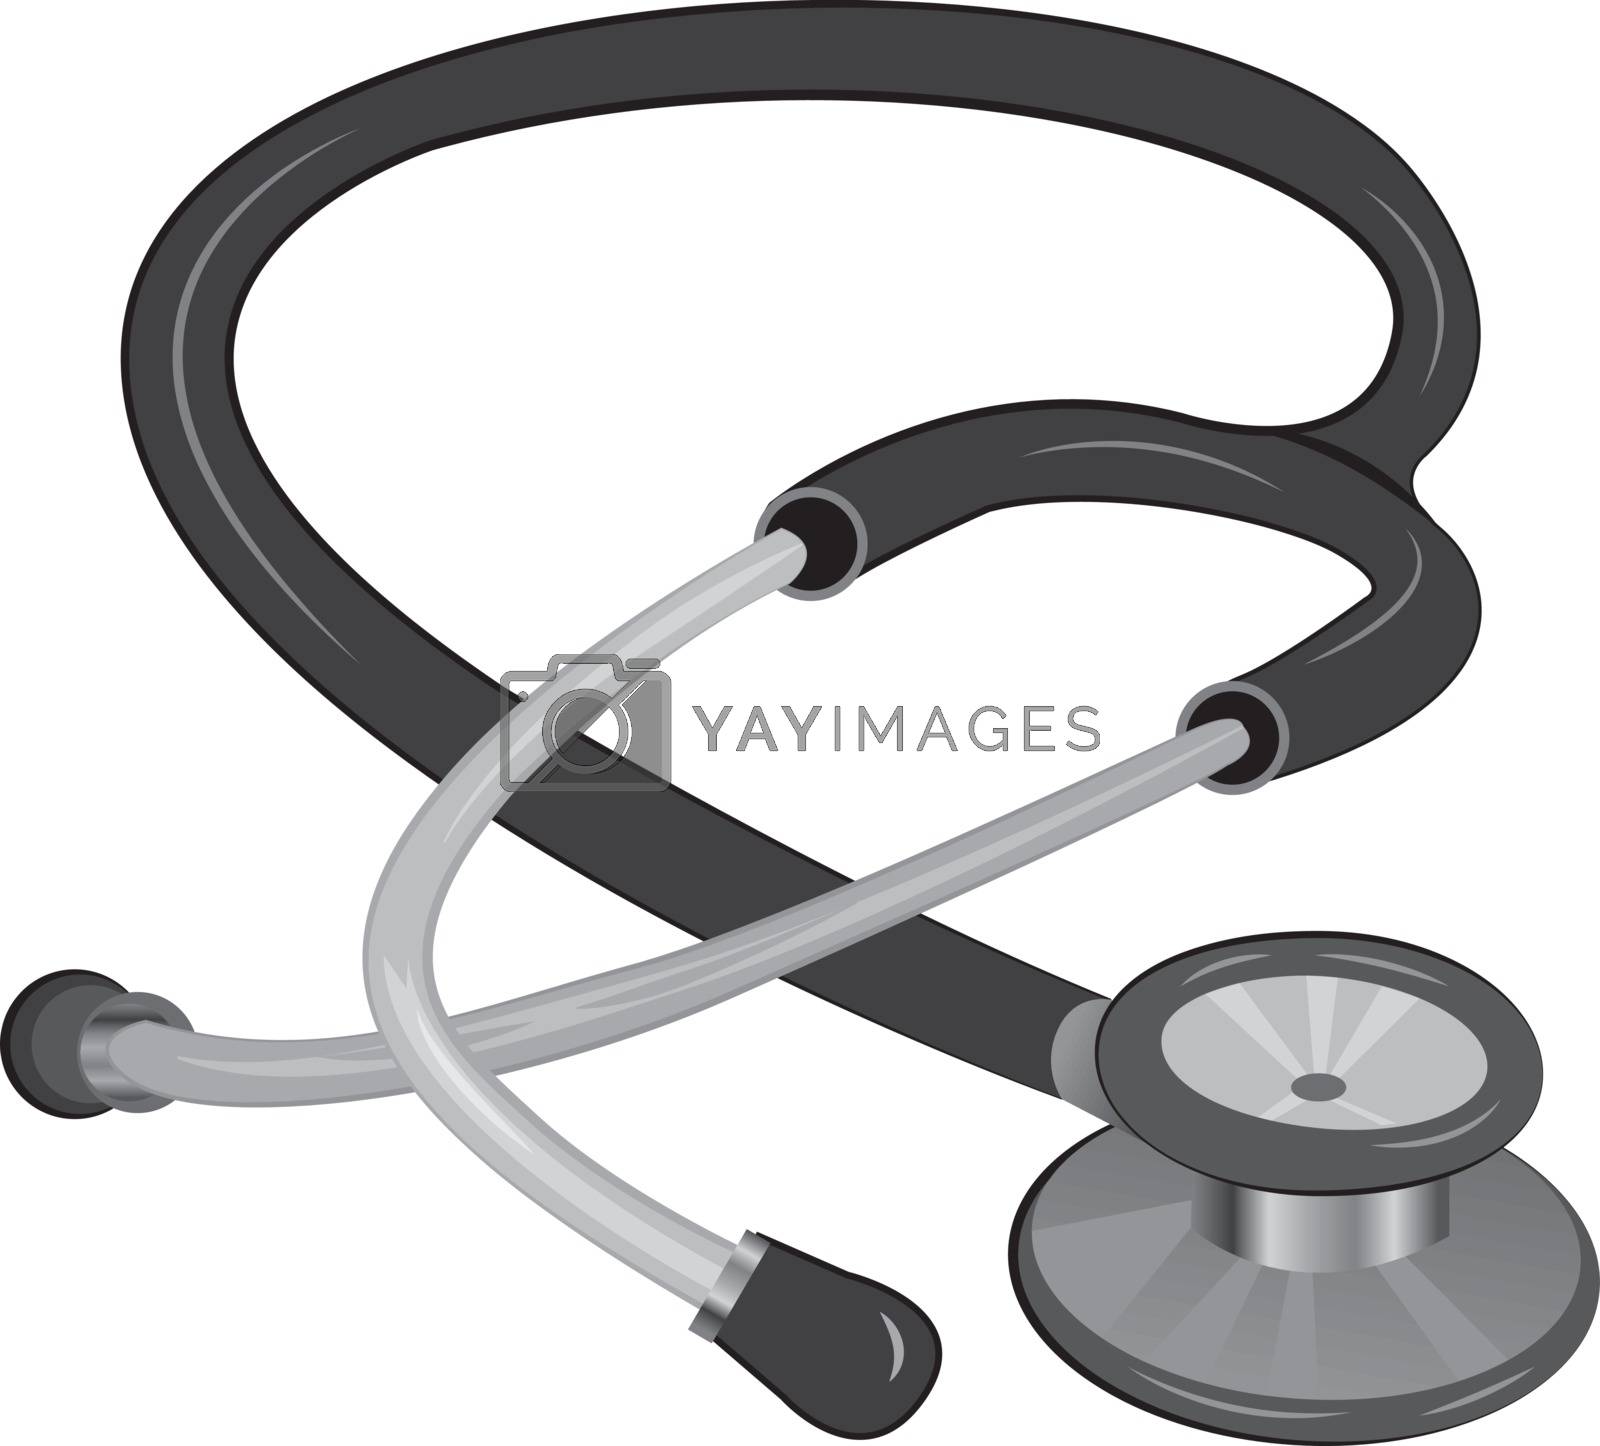 Royalty free image of STETHOSCOPE vector illustration by Olena758